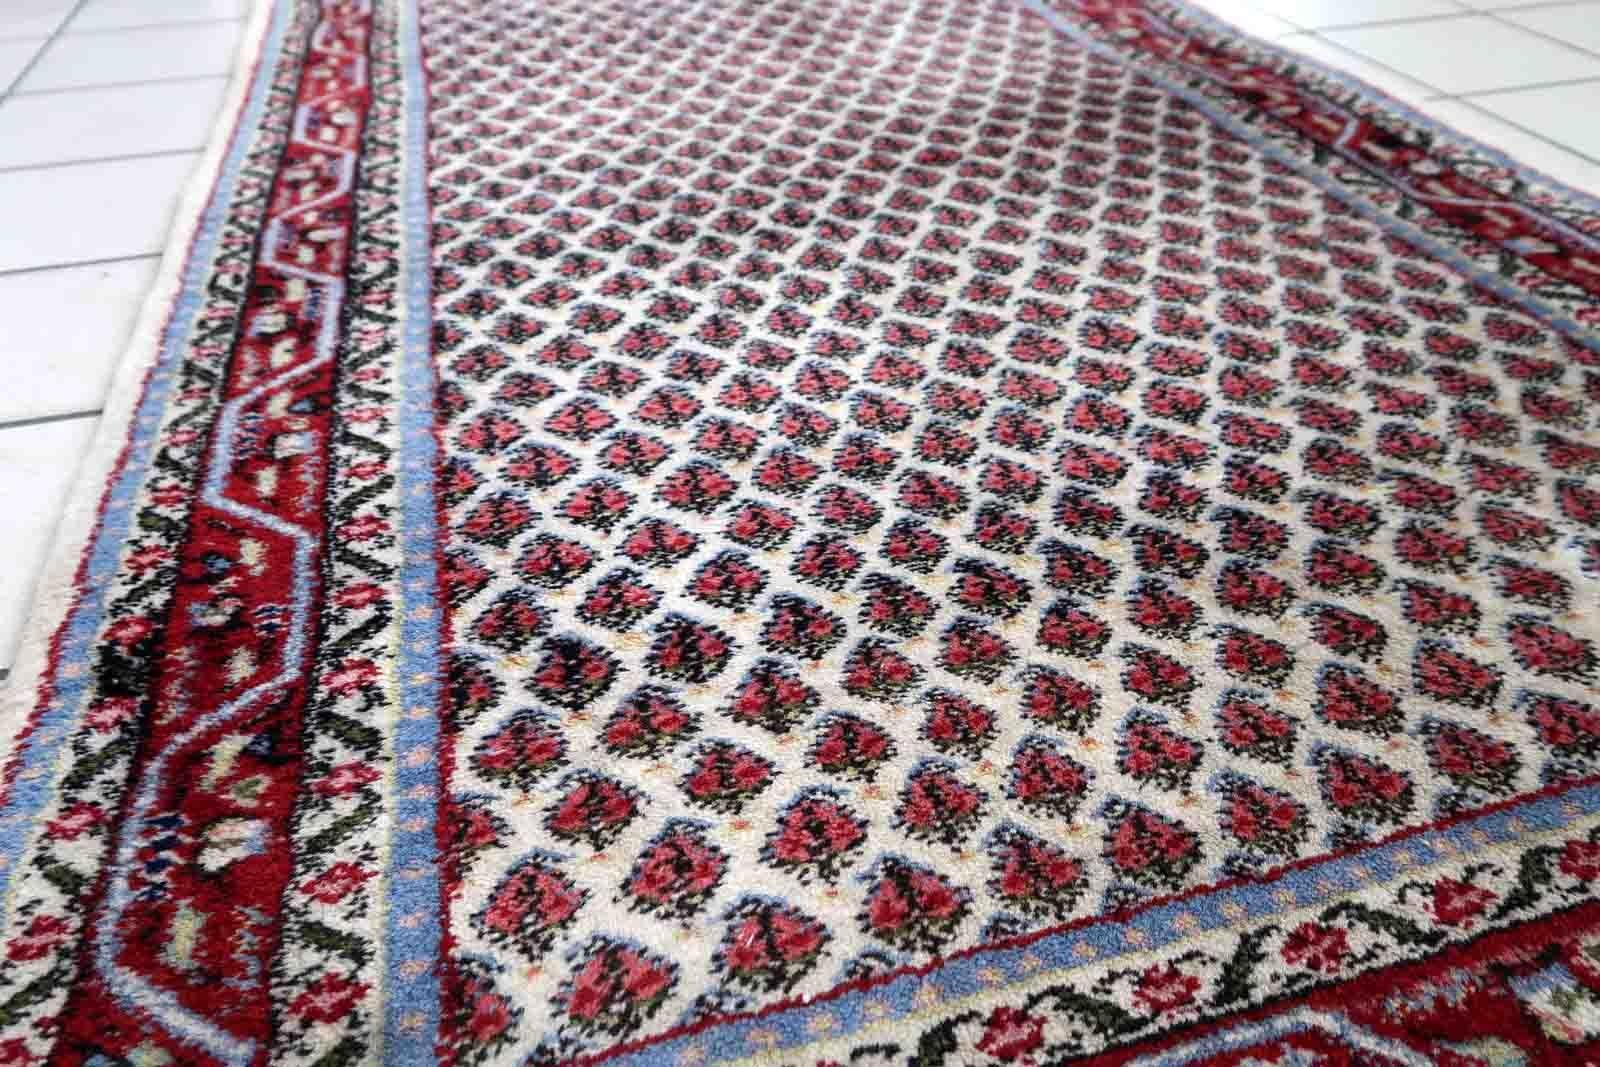 Handmade vintage Indian Seraband rug in original good condition. The rug has been made in wool in the end of 20th century.

-condition: original good,

-circa: 1970s,

-size: 3' x 5.3' (94cm x 162cm),

-material: wool,

-country of origin: